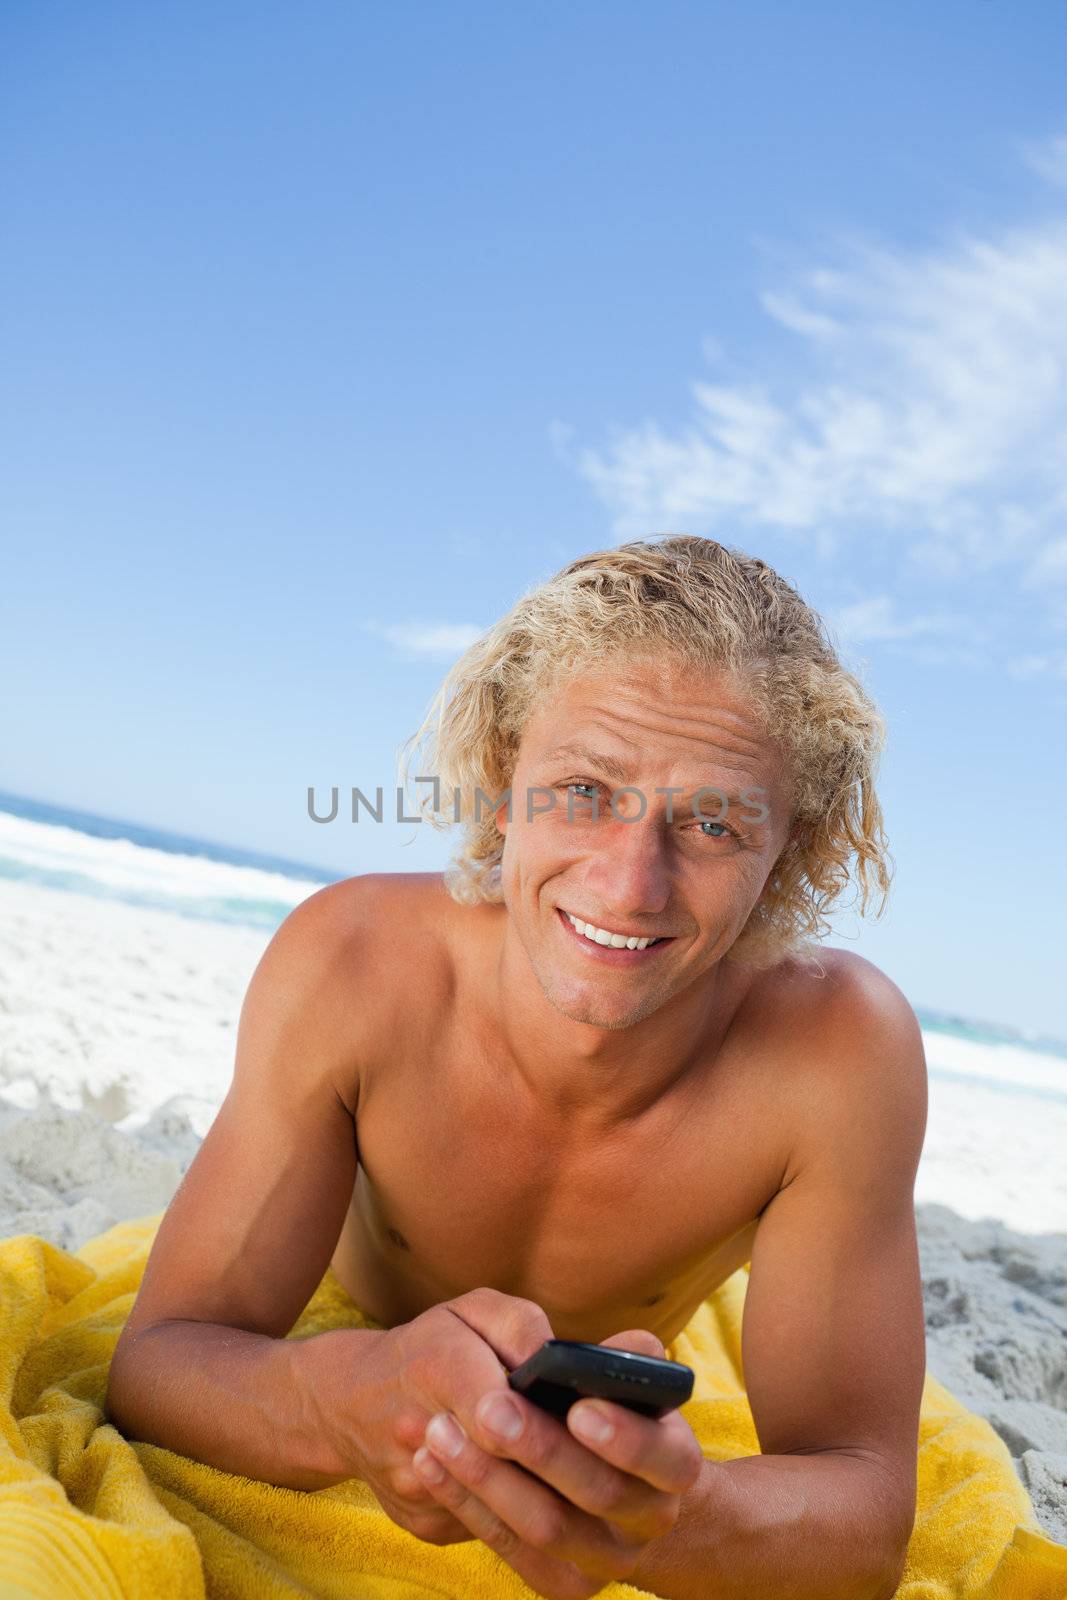 Smiling blonde man sending a text while sunbathing on the beach by Wavebreakmedia